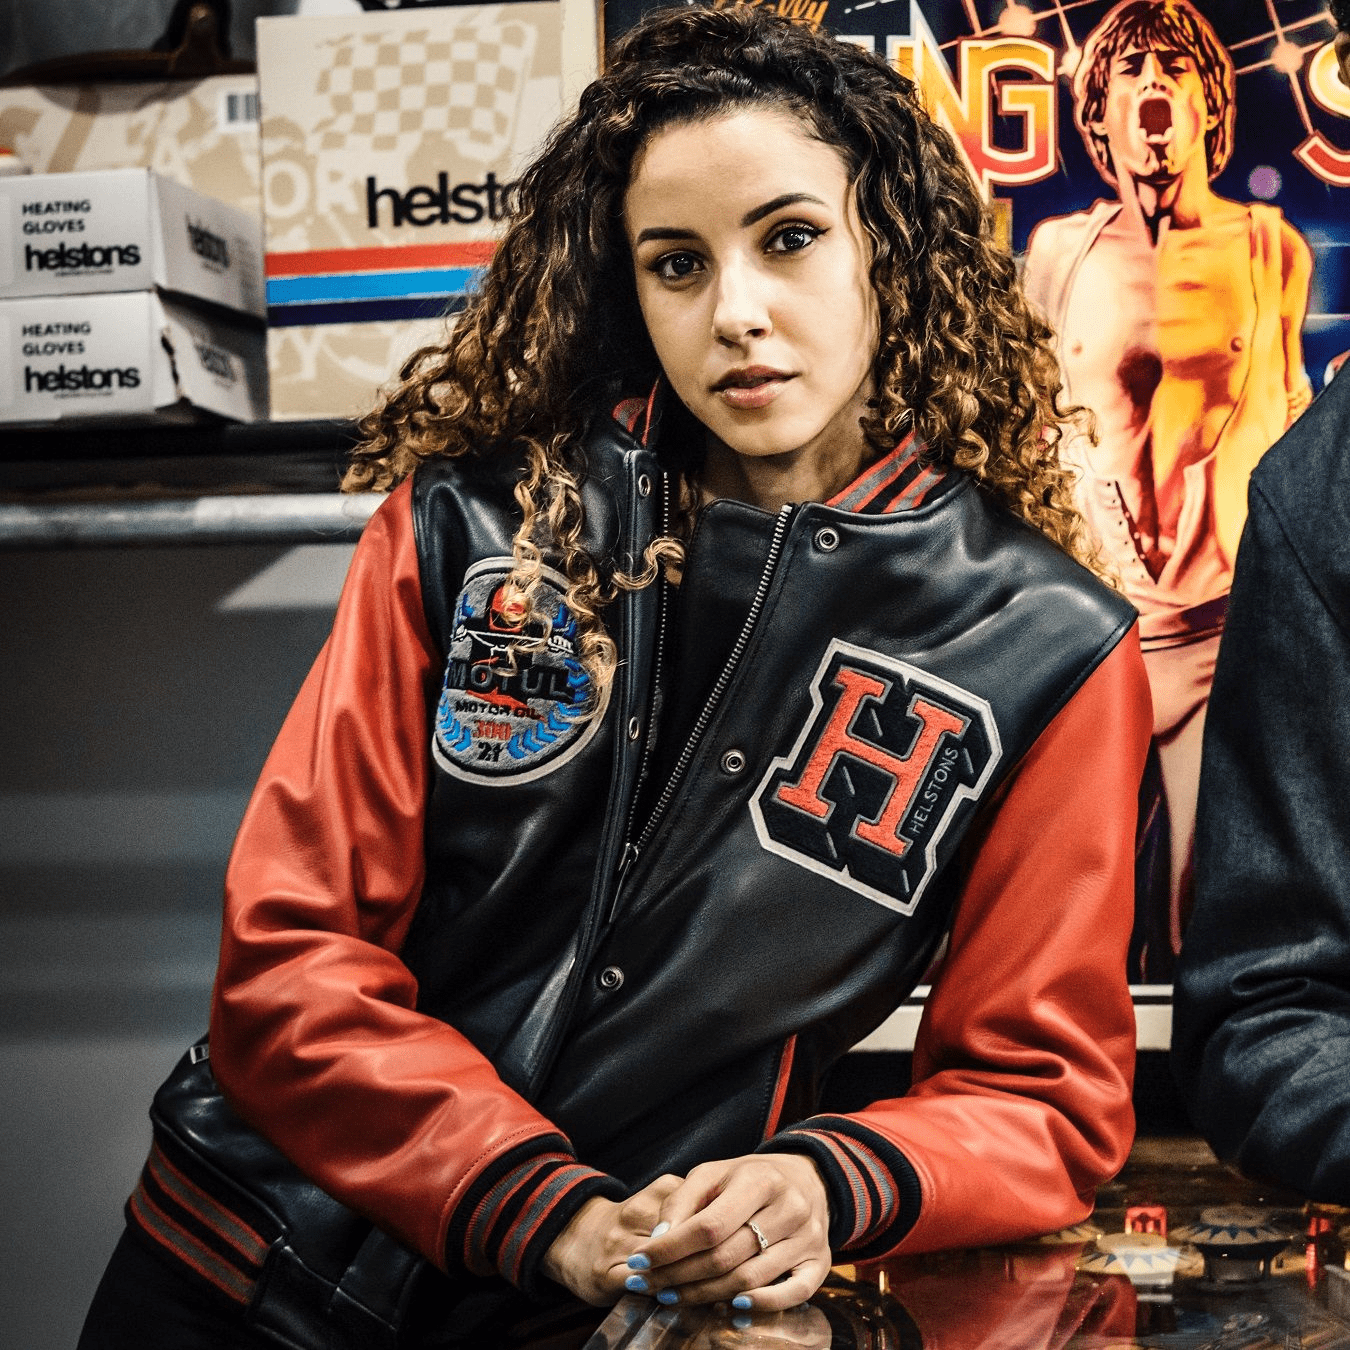 207845 The iconic American college jacket, infused with the expertise of Helstons' designer and adorned with Motul's Heritage 300 2T oil logo, has transformed into a motorcycle protective gear.